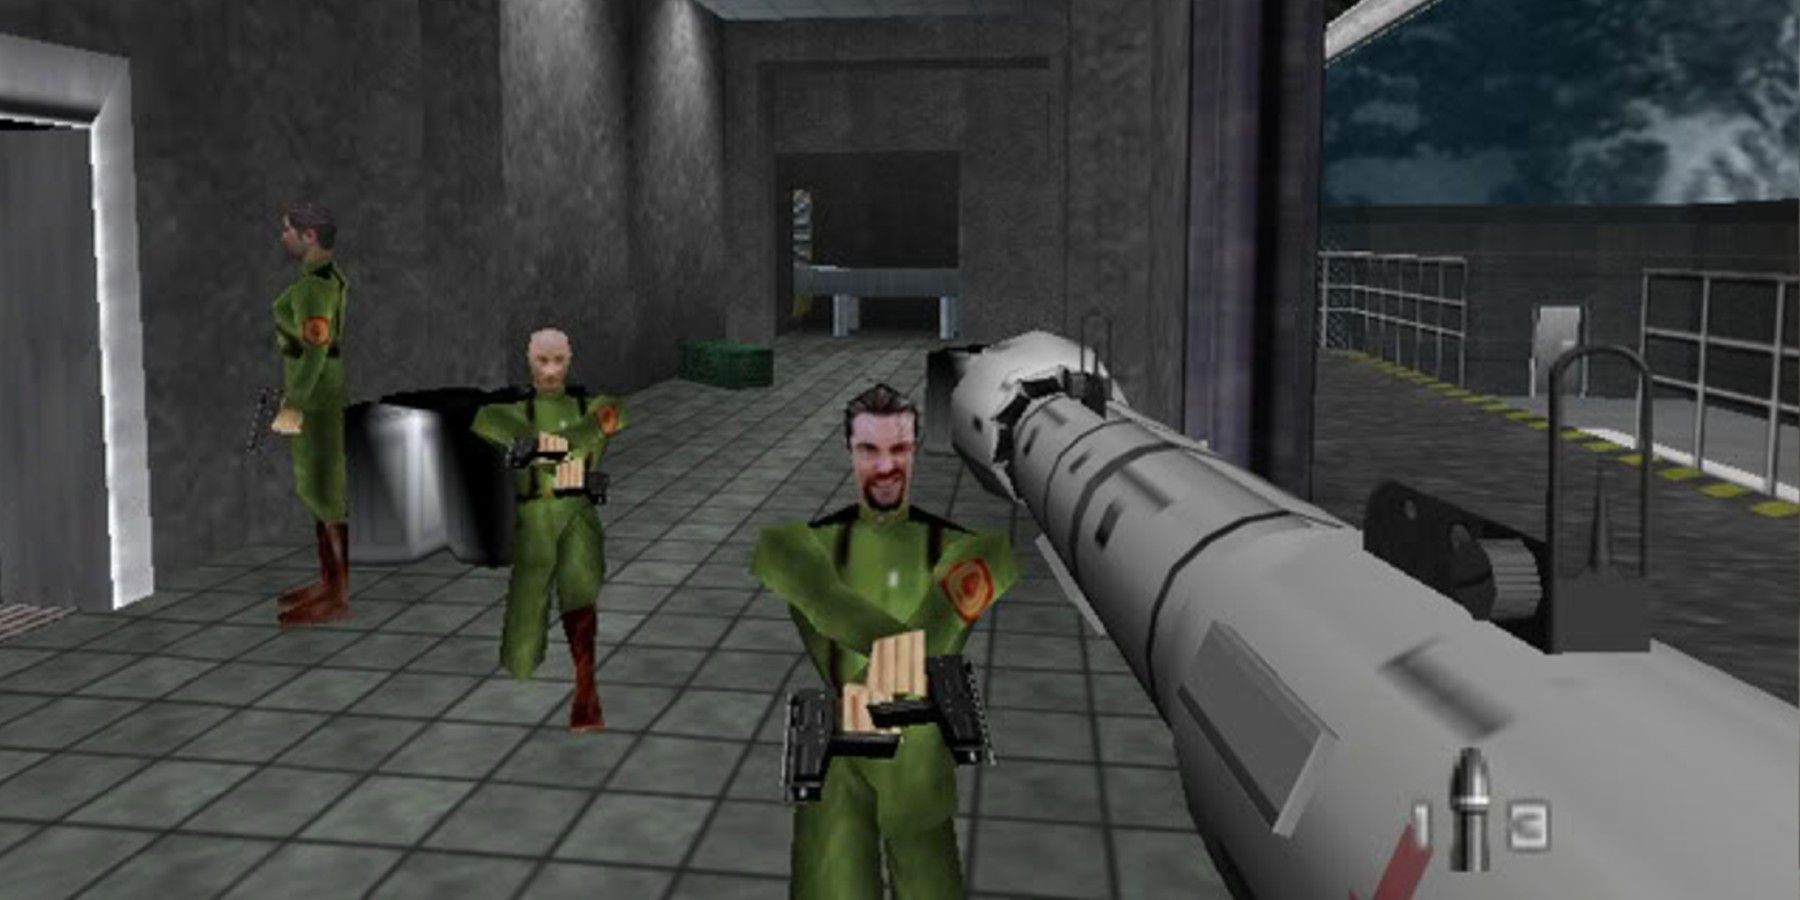 GoldenEye 007 Shakes Up the Action for Nintendo Switch Online +